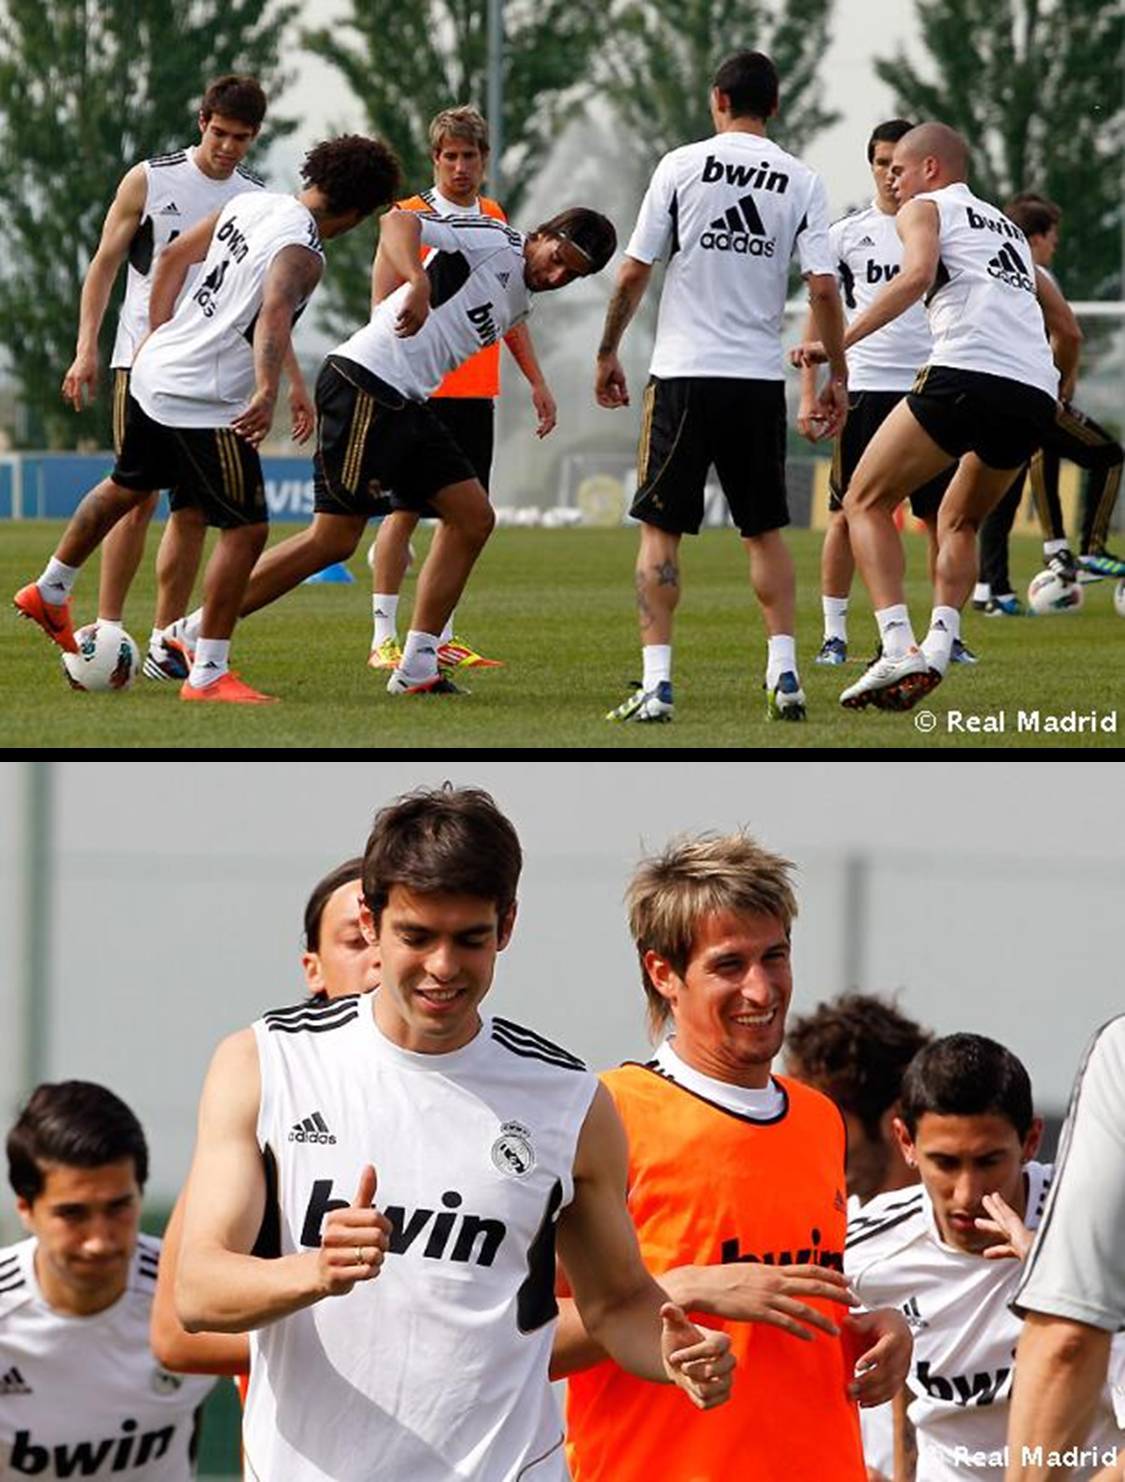 Kaká in good spirits! Me gusta  ♥I didn&#8217;t see Cristiano on any of the pics. Hope he has just a day off and everything is OK.Training 11.05.2012
My other tumblr: Eclectic Interests and Beautiful Sports